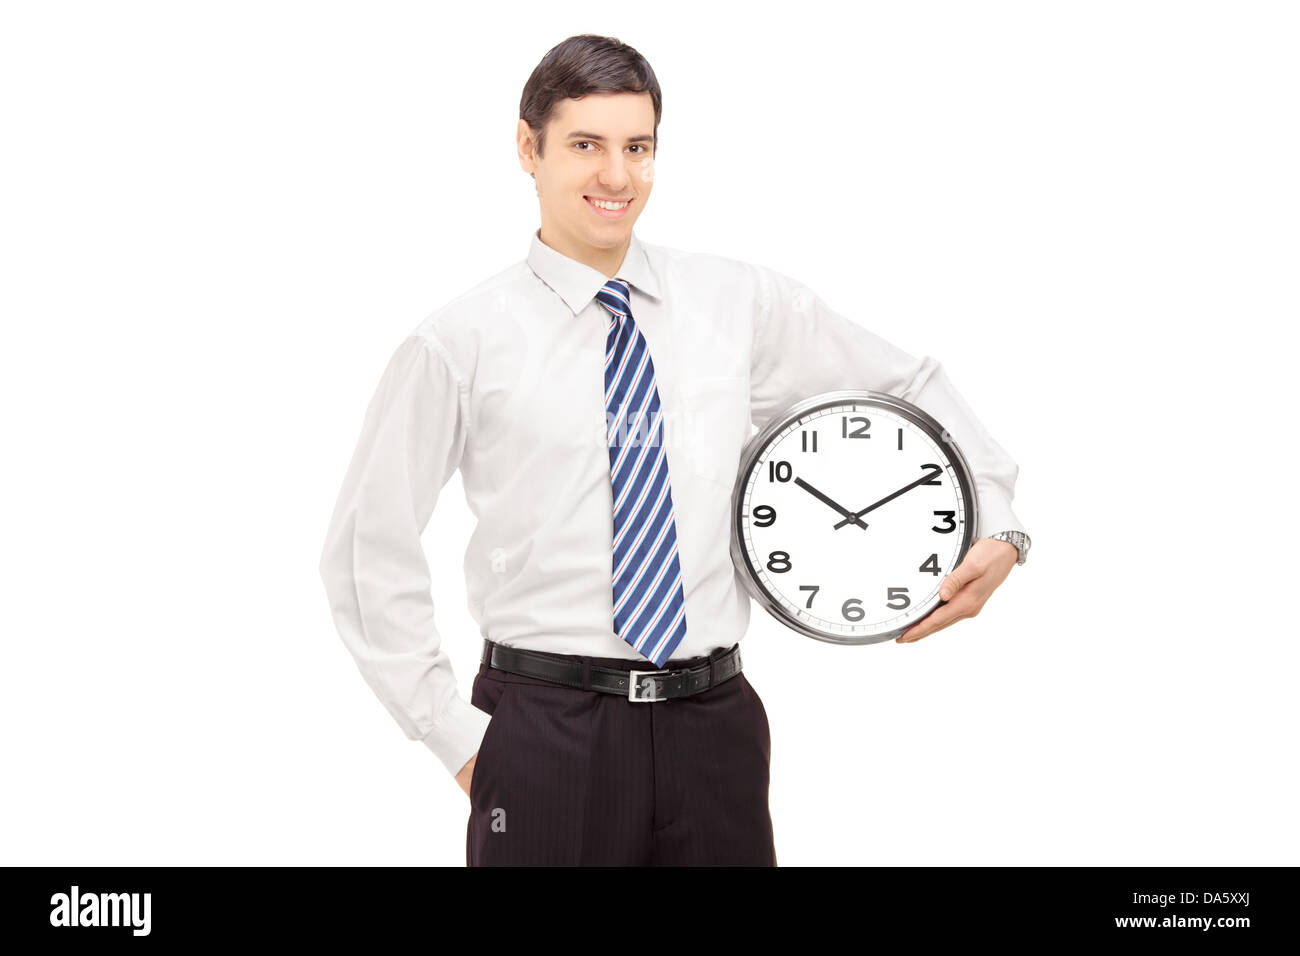 Smiling guy in suit holding a clock isolated on white background Stock Photo